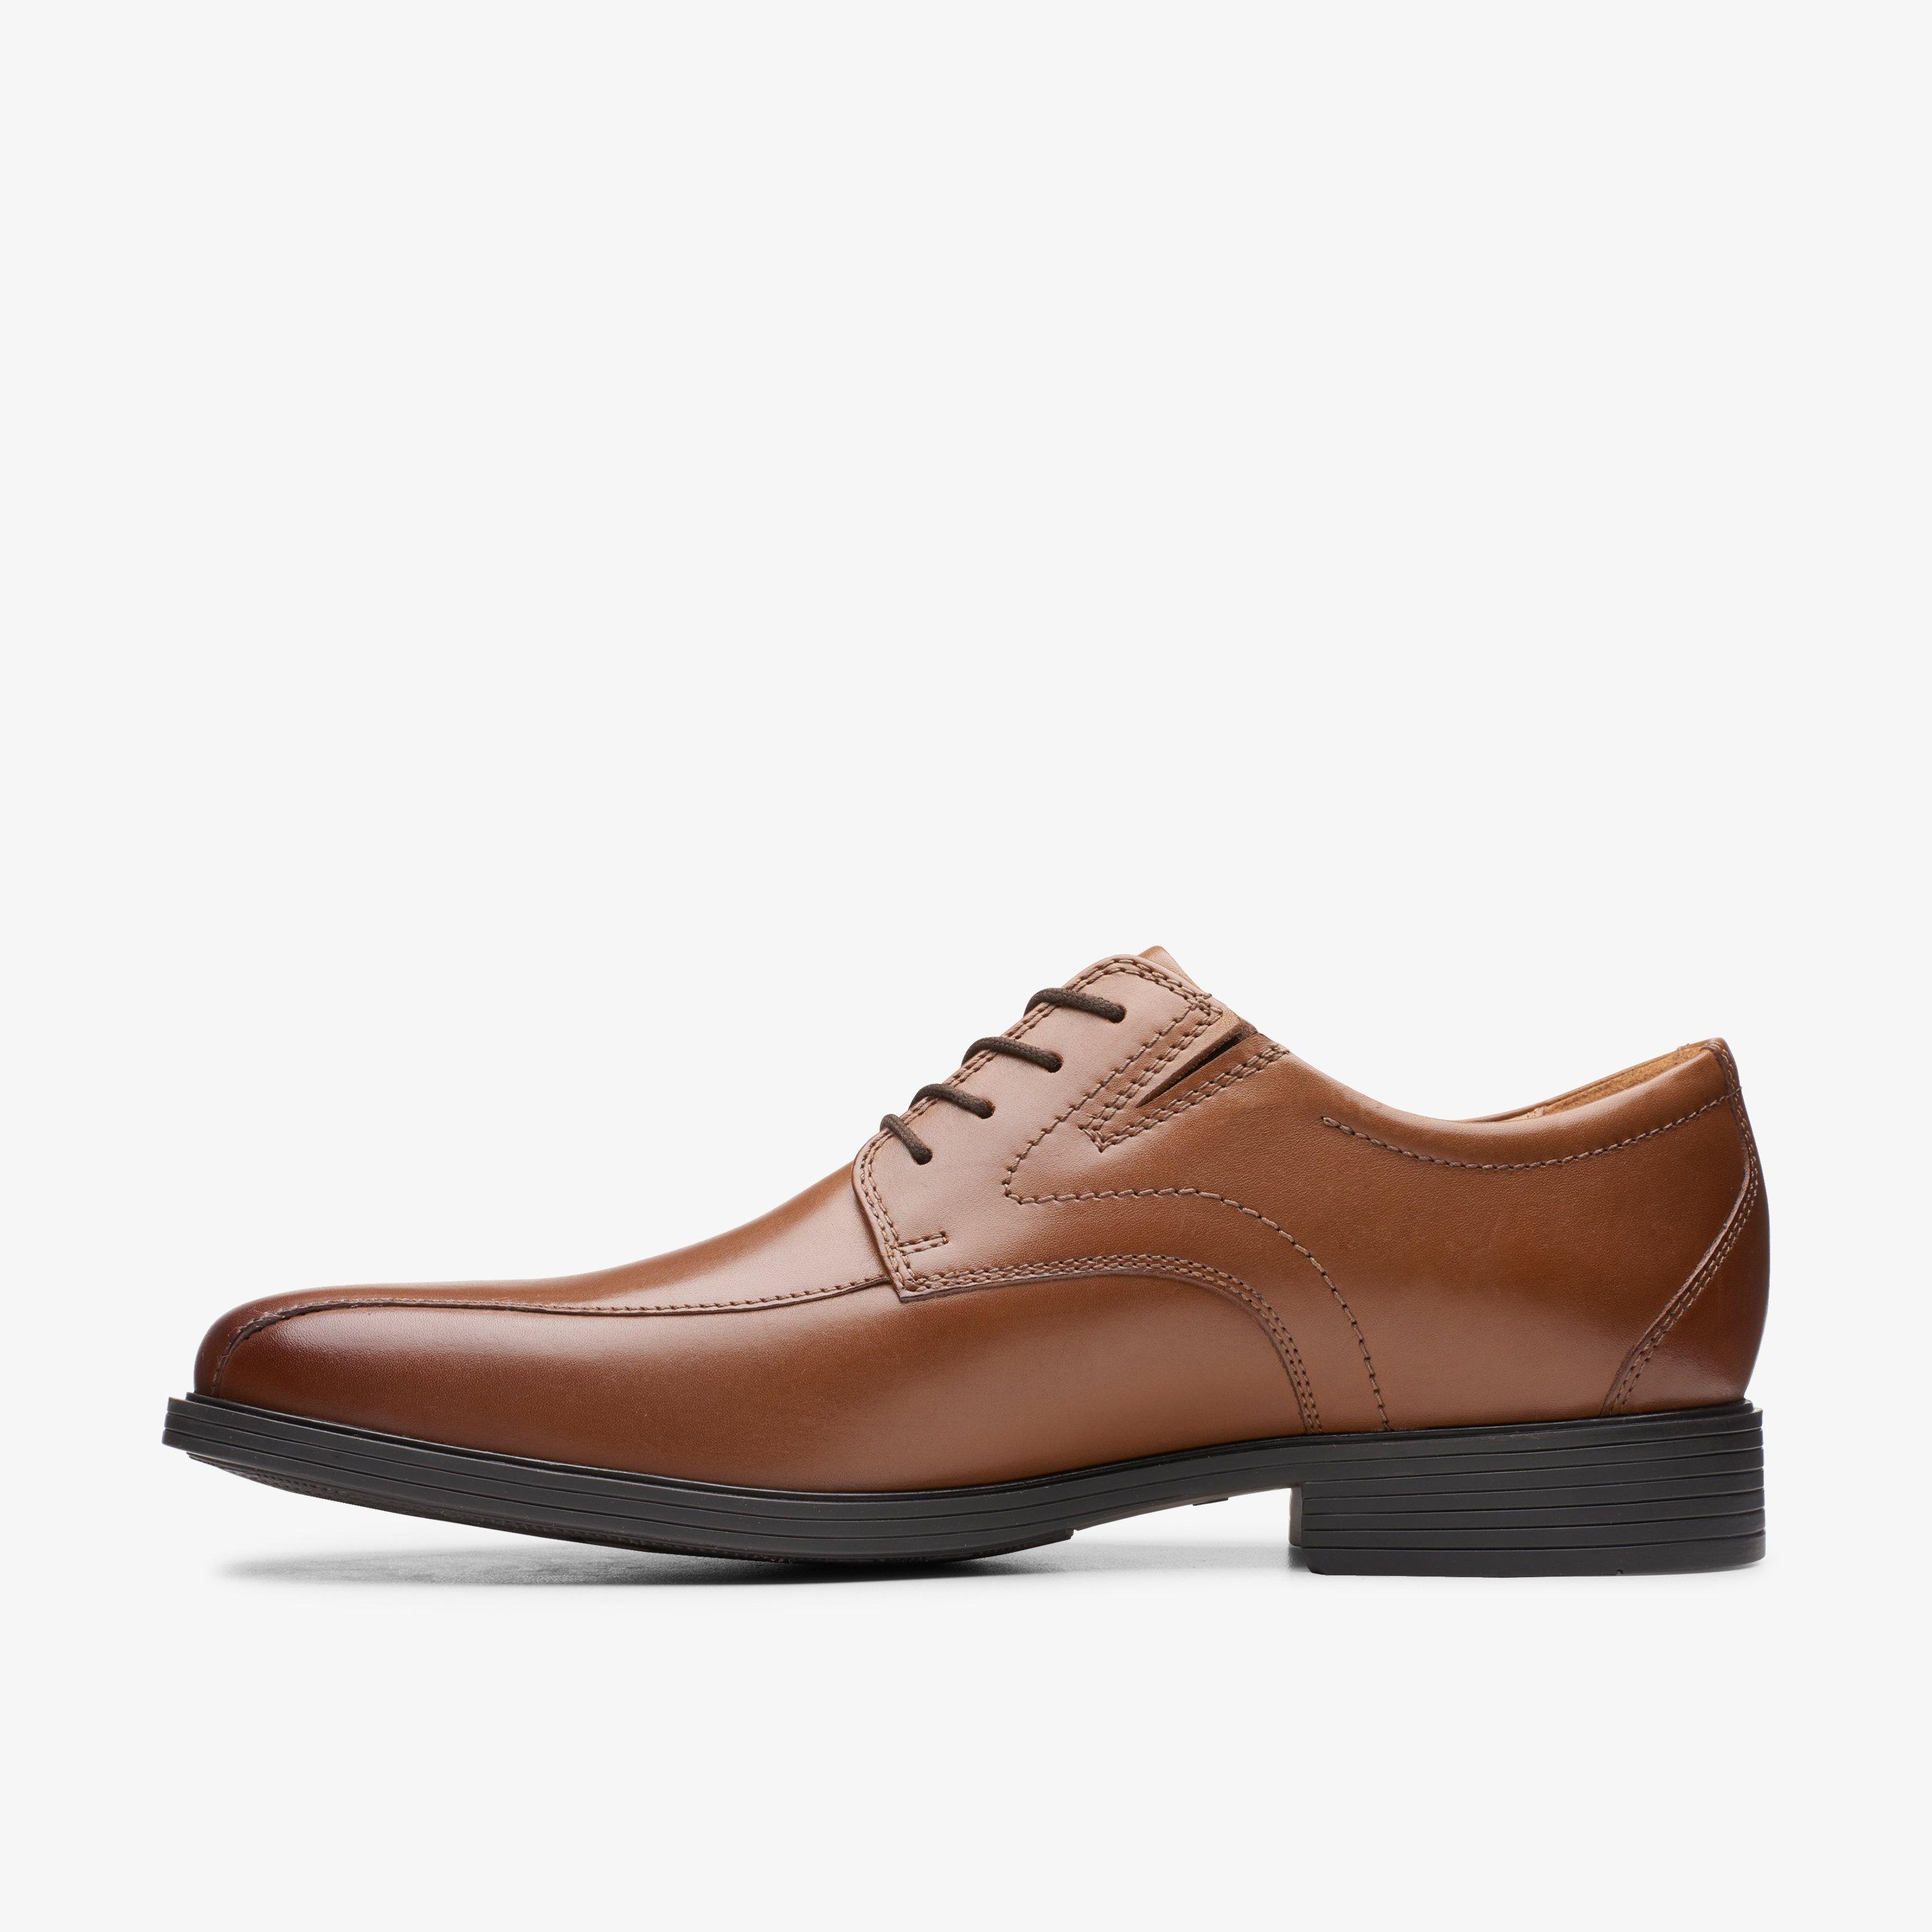 The Most Comfortable Men's Dress Shoes in 2023